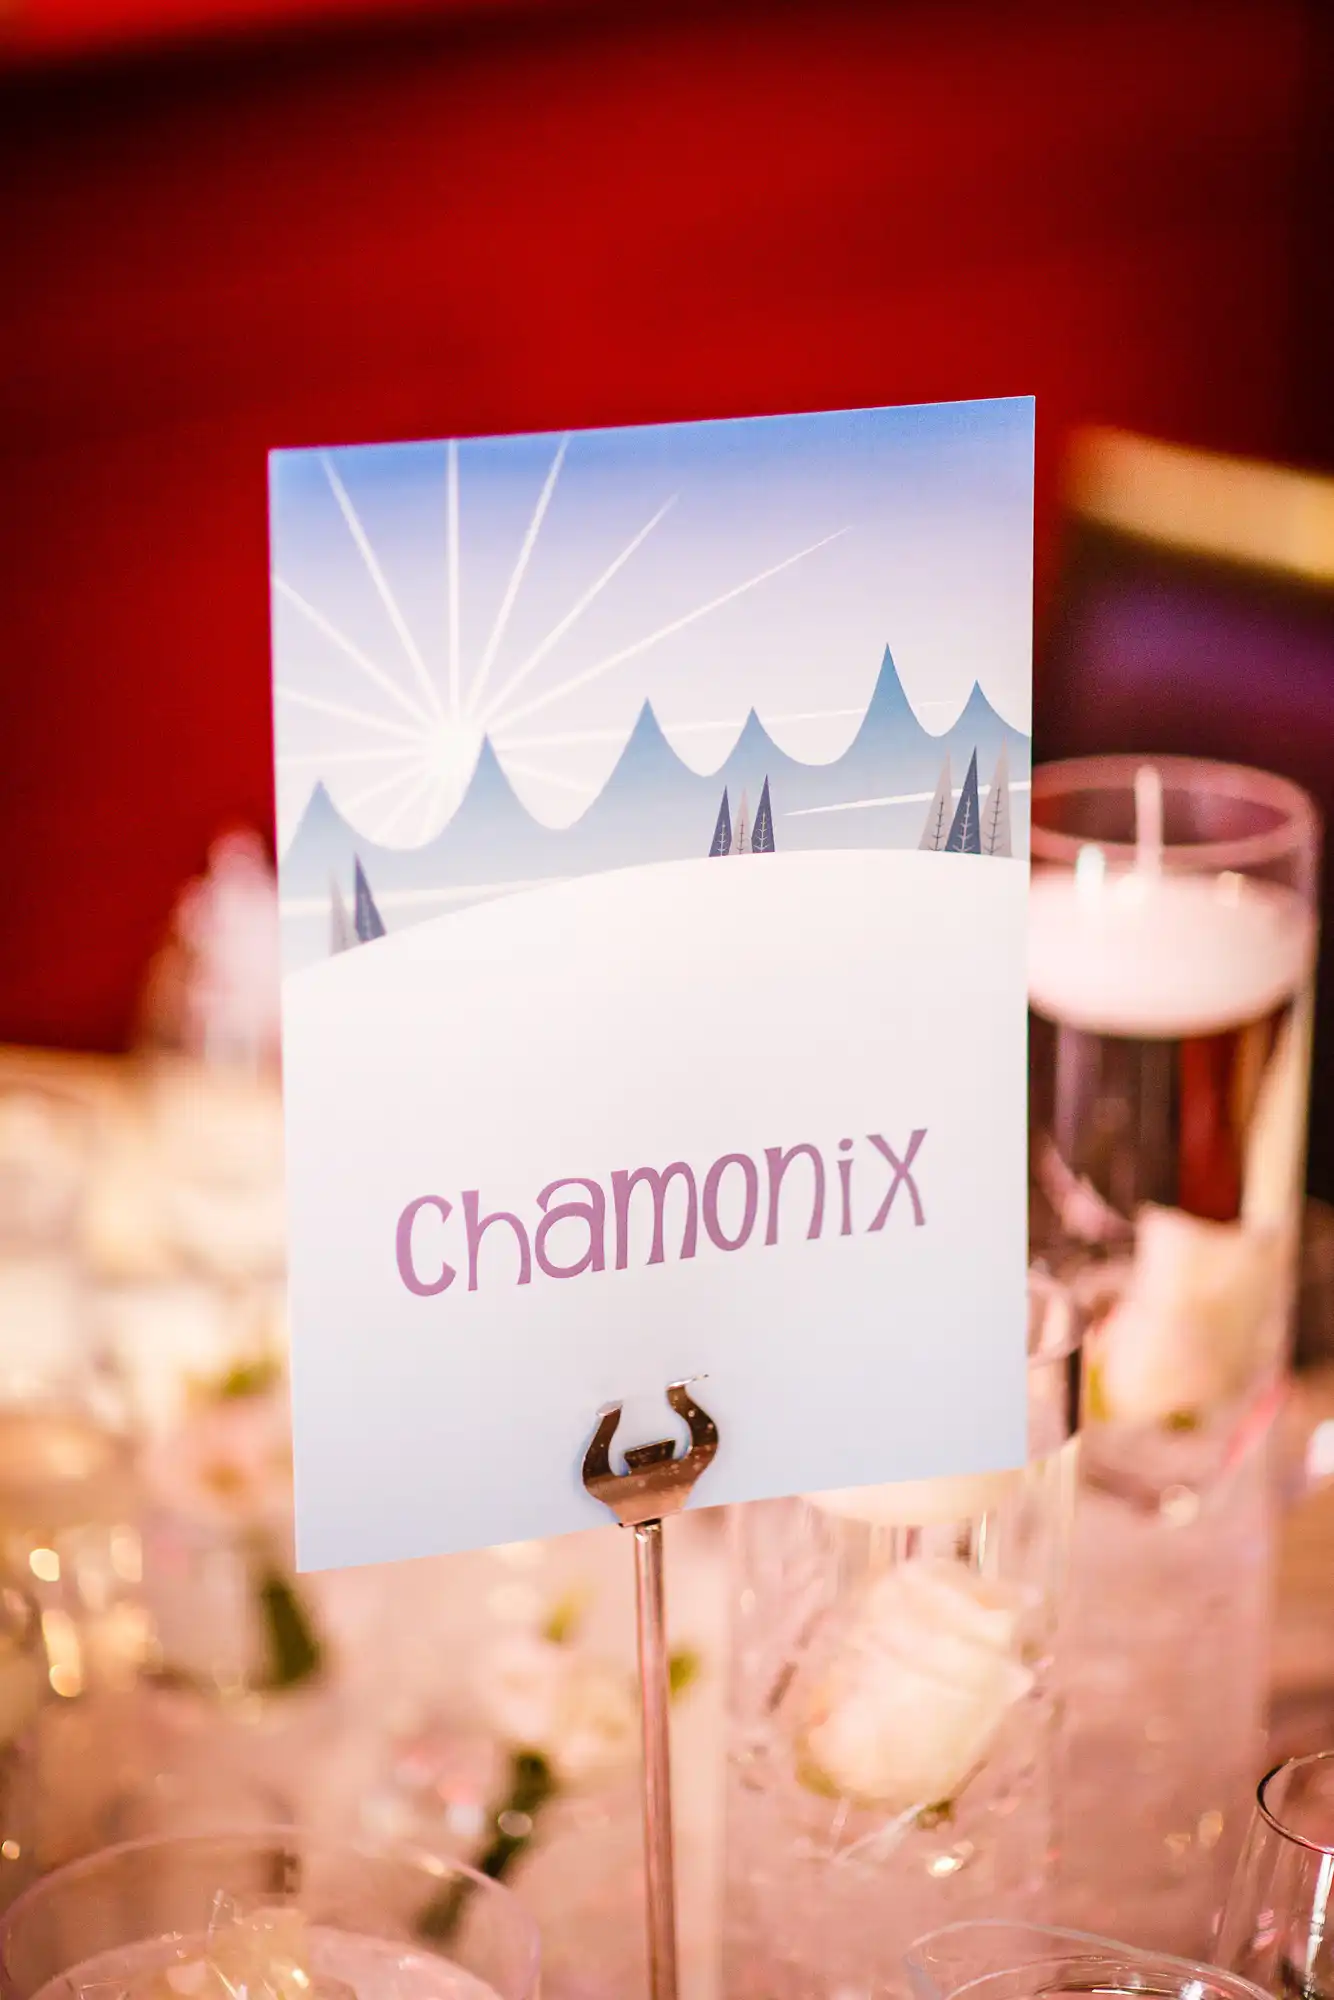 Table marker with "chamonix" printed on it, featuring a graphic of snowy mountain peaks, placed among glassware on a table with a red background.